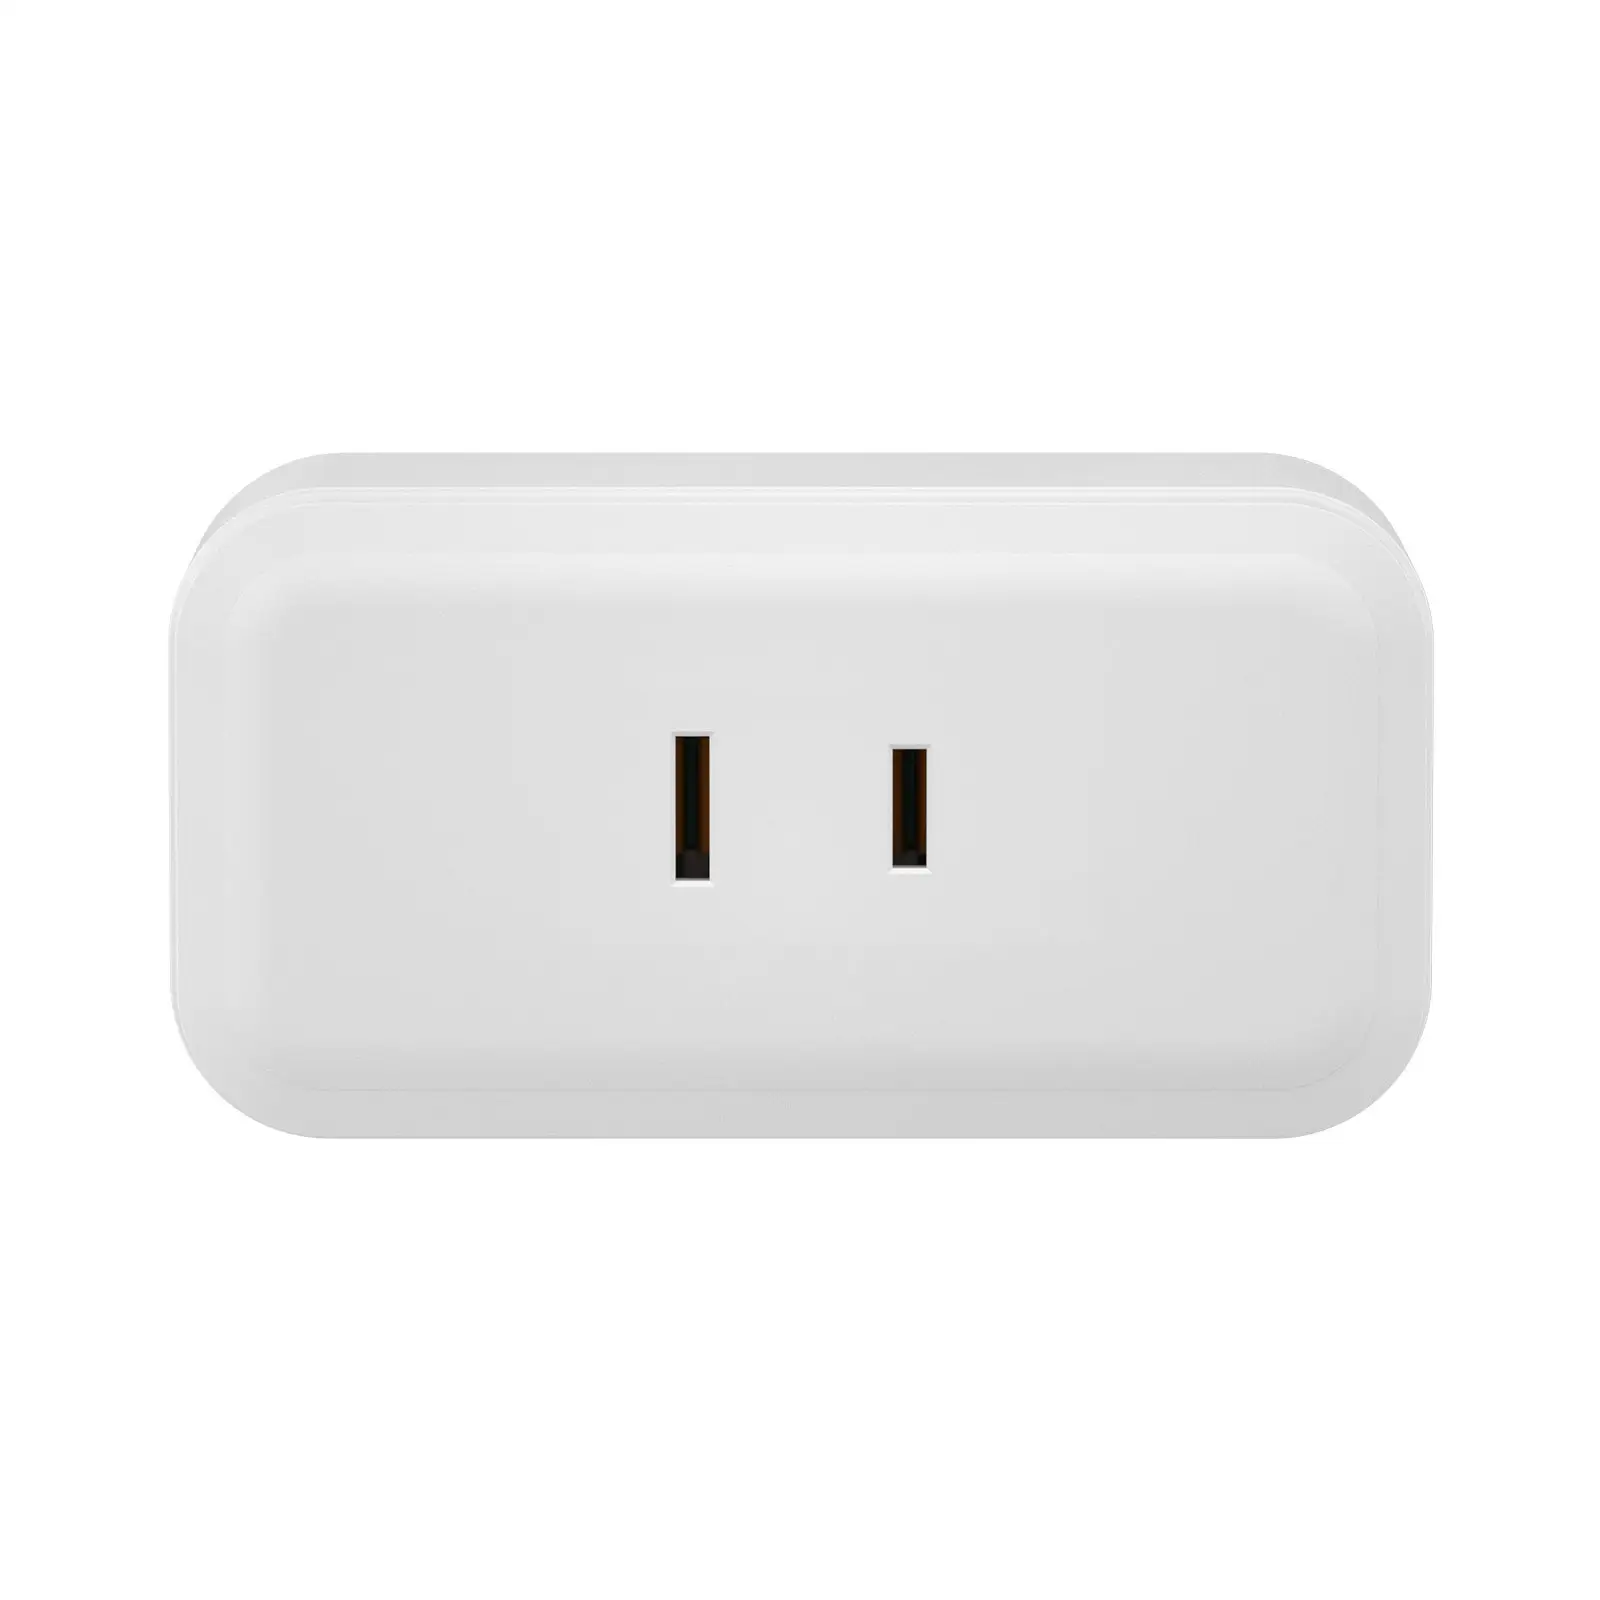 SONOFF S40 15A WiFi Smart Plug with Energy Monitoring ETL Certified, Smart Outlet Timer Switch, Work with Alexa/Google Home